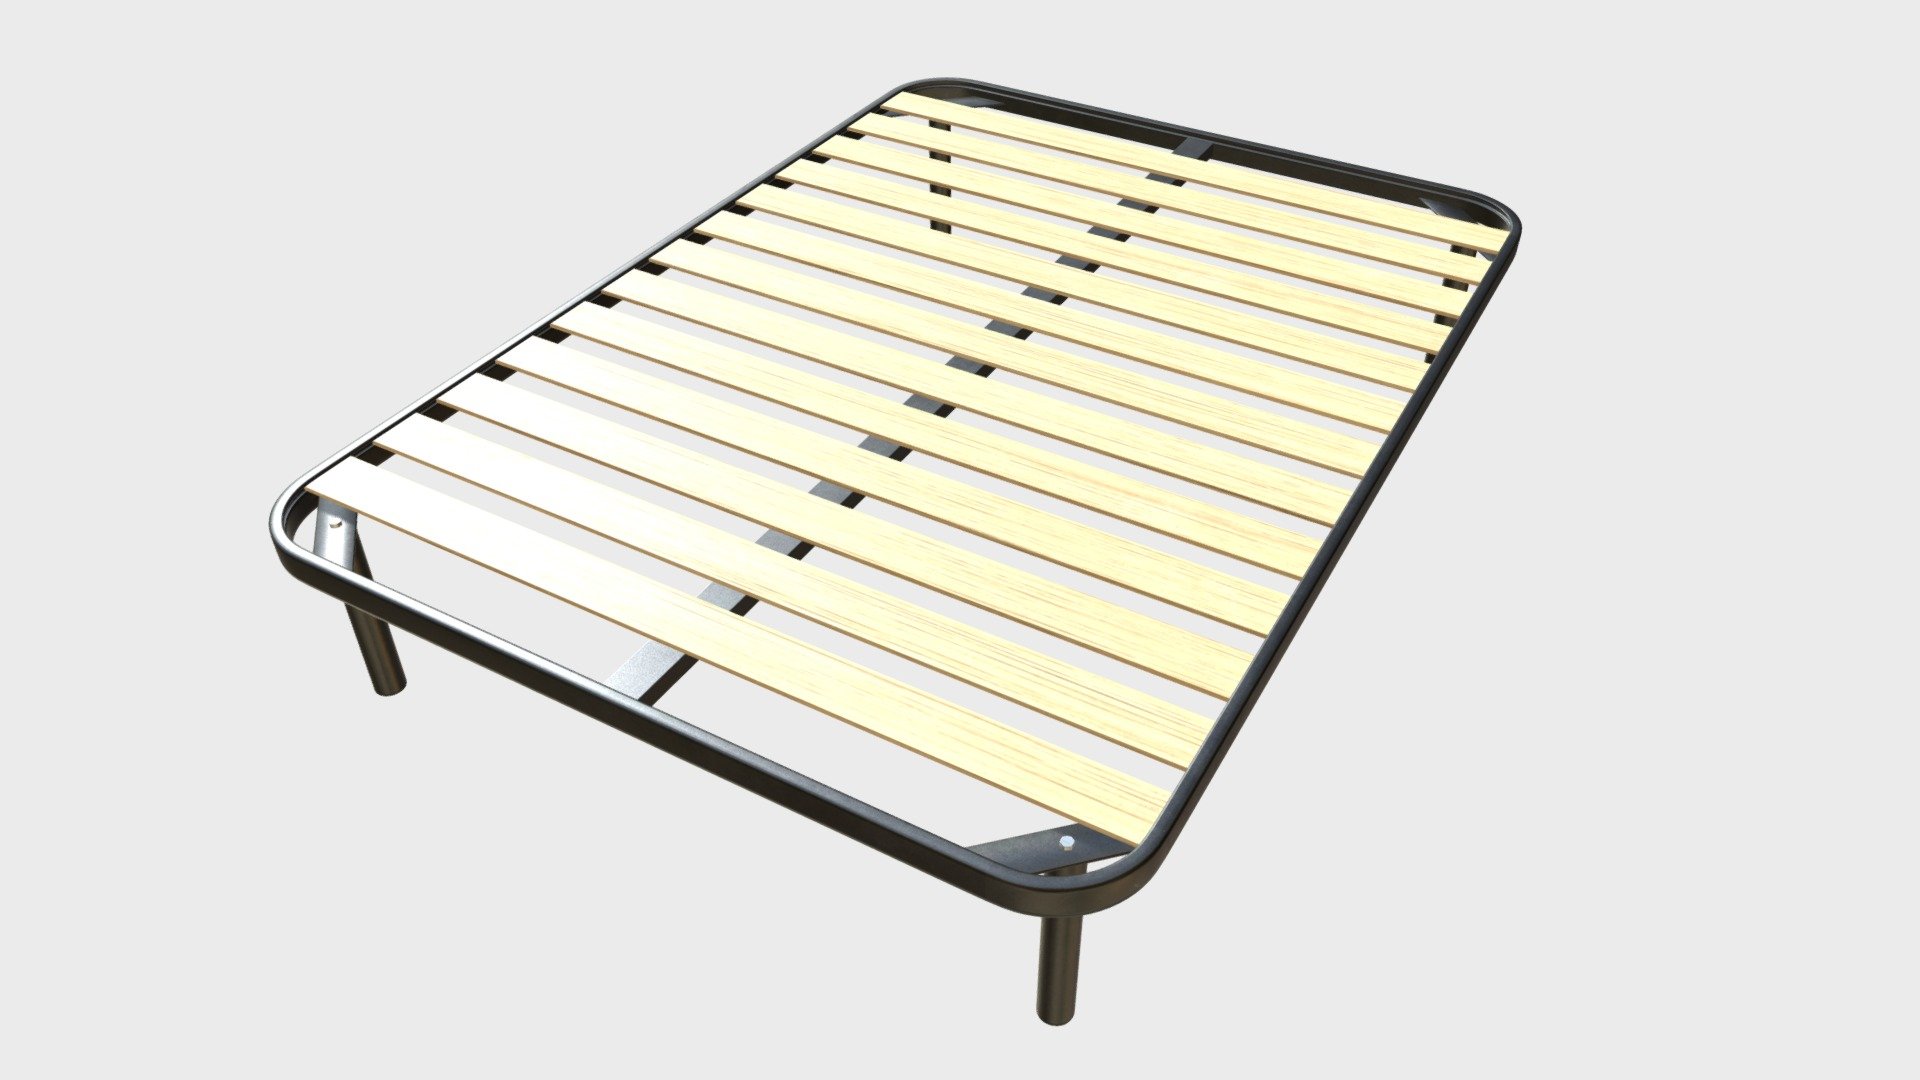 === The following description refers to the additional ZIP package provided with this model ===

Full size bed frame with small slats 3D Model. Production-ready 3D Model, with PBR materials, textures, non overlapping UV Layout map provided in the package.

Quads only geometries (no tris/ngons).

Formats included: FBX, OBJ; scenes: BLEND (with Cycles / Eevee PBR Materials and Textures); other: 16-bit PNGs with Alpha.

1 Object (mesh), 1 PBR Material, UV unwrapped (non overlapping UV Layout map provided in the package); UV-mapped Textures.

UV Layout maps and Image Textures resolutions: 2048x2048; PBR Textures made with Substance Painter.

Polygonal, QUADS ONLY (no tris/ngons); 11512 vertices, 11476 quad faces (22952 tris).

Real world dimensions; scene scale units: cm in Blender 3.3 (that is: Metric with 0.01 scale).

Uniform scale object (scale applied in Blender 3.3) 3d model